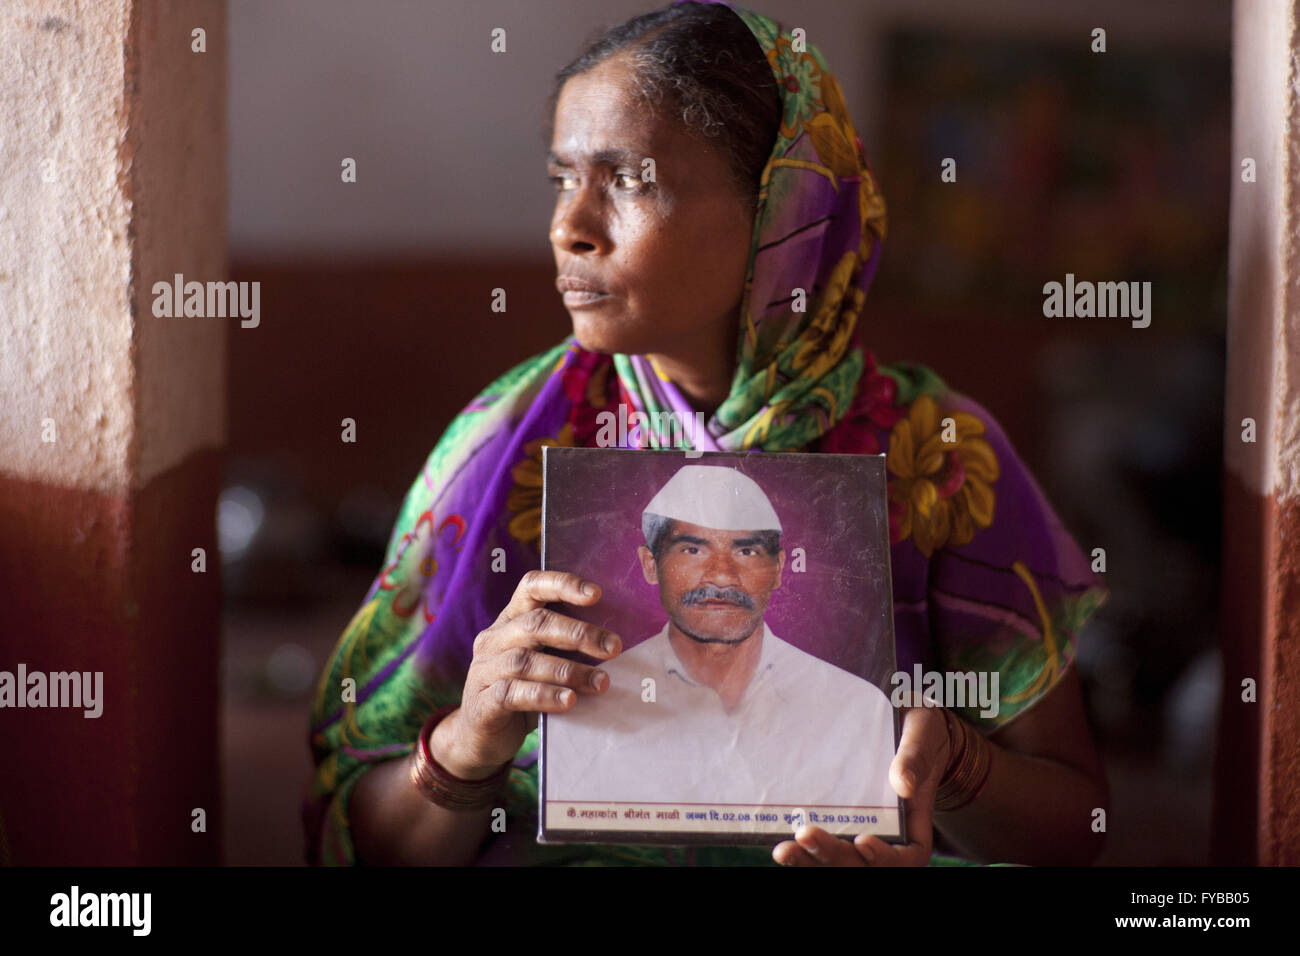 Latur, Maharashtra. 21st Apr, 2016. 21 April 2016 - Gategaon, Latur - INDIA.Kamalbai with a picture of her farmer husband Mahakant Mali, 55, who committed suicide by hanging himself from a dried Mango tree.Latur is part of the state's predominantly agricultural Marathwada region, where 273 farmers committed suicide between January and March this year.The area is among the worst affected by the drought and some families in Latur have left for cities such as the state capital Mumbai, nearly 500 kilometres away. In Latur town, there are huge queues at water storage tanks that are fed from Stock Photo